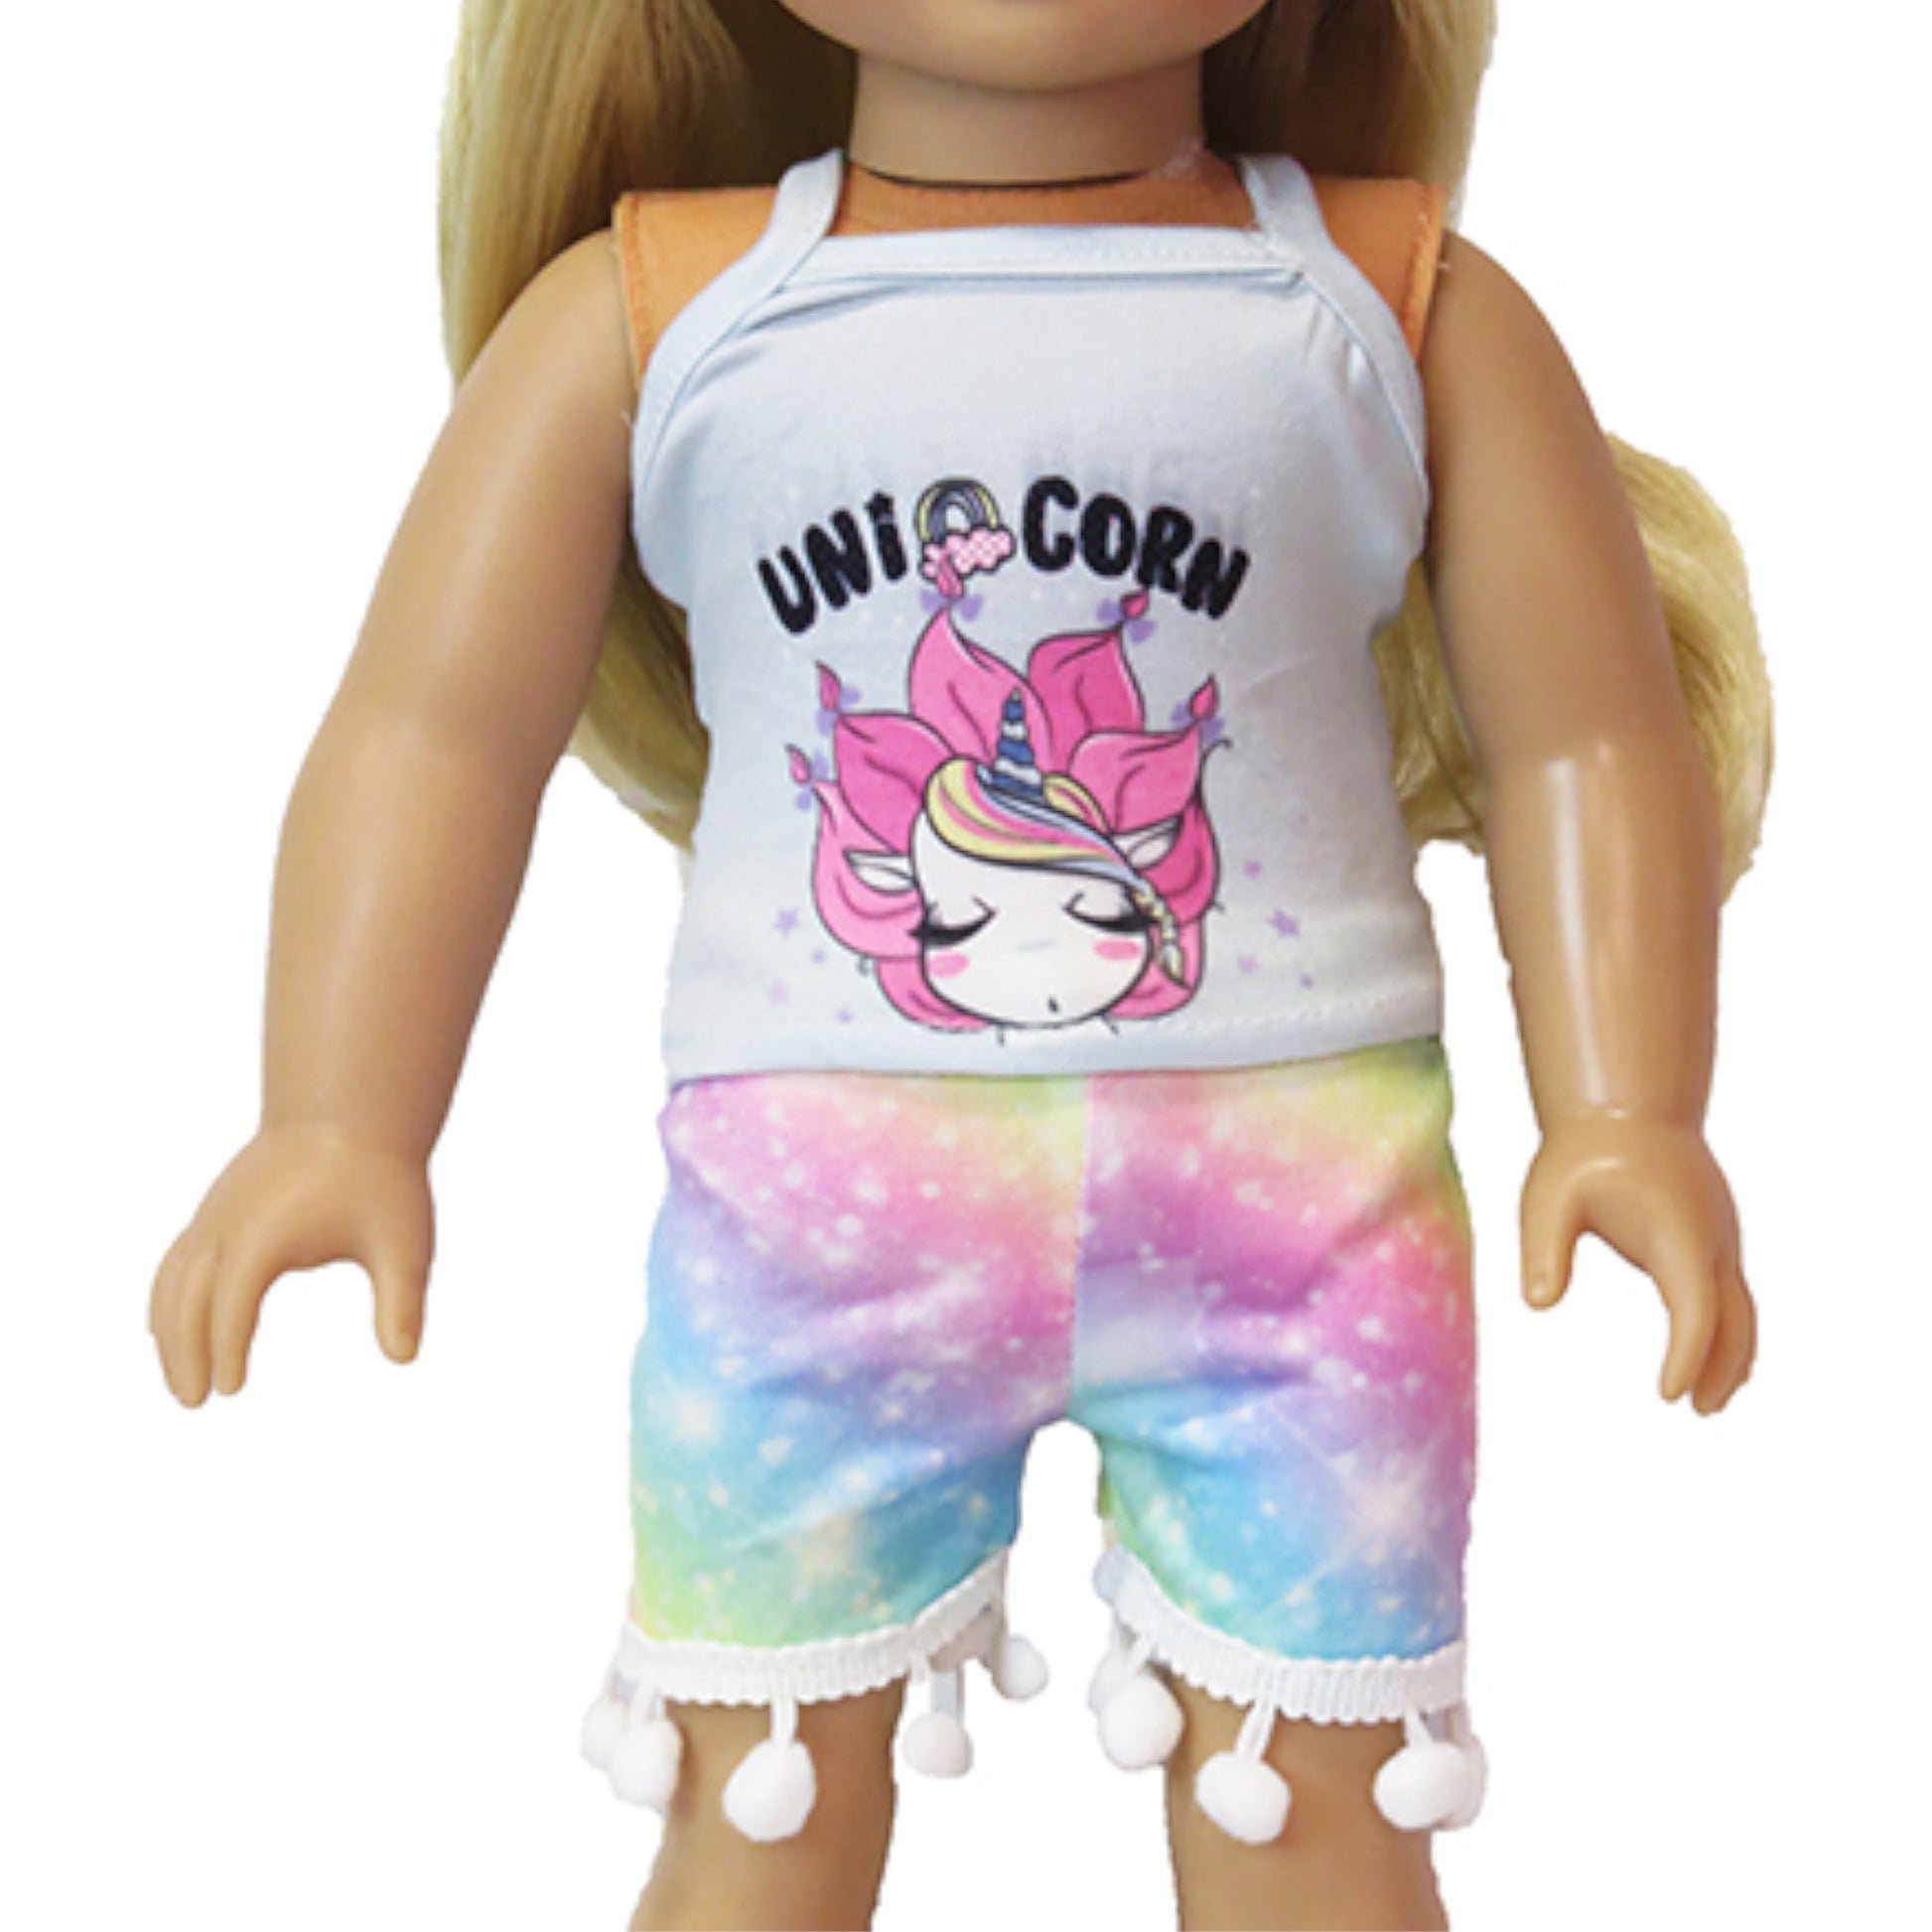 Two Piece Unicorn Outfit for 18-inch dolls with doll Up Close